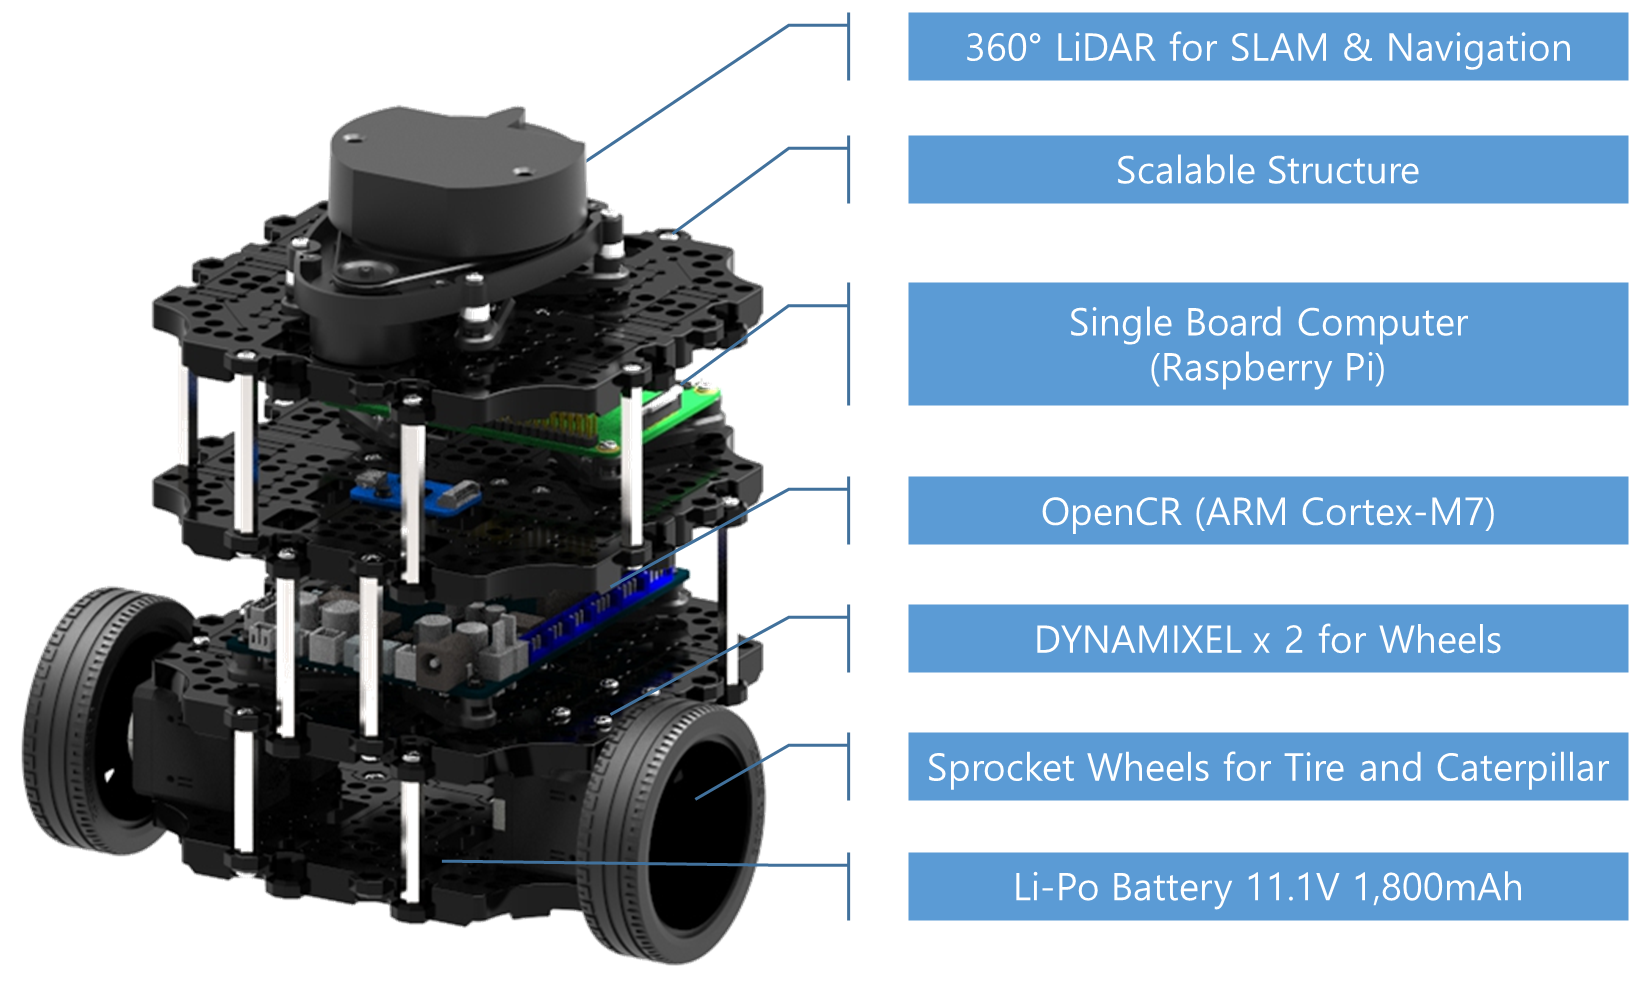 Turtlebot3 Overview